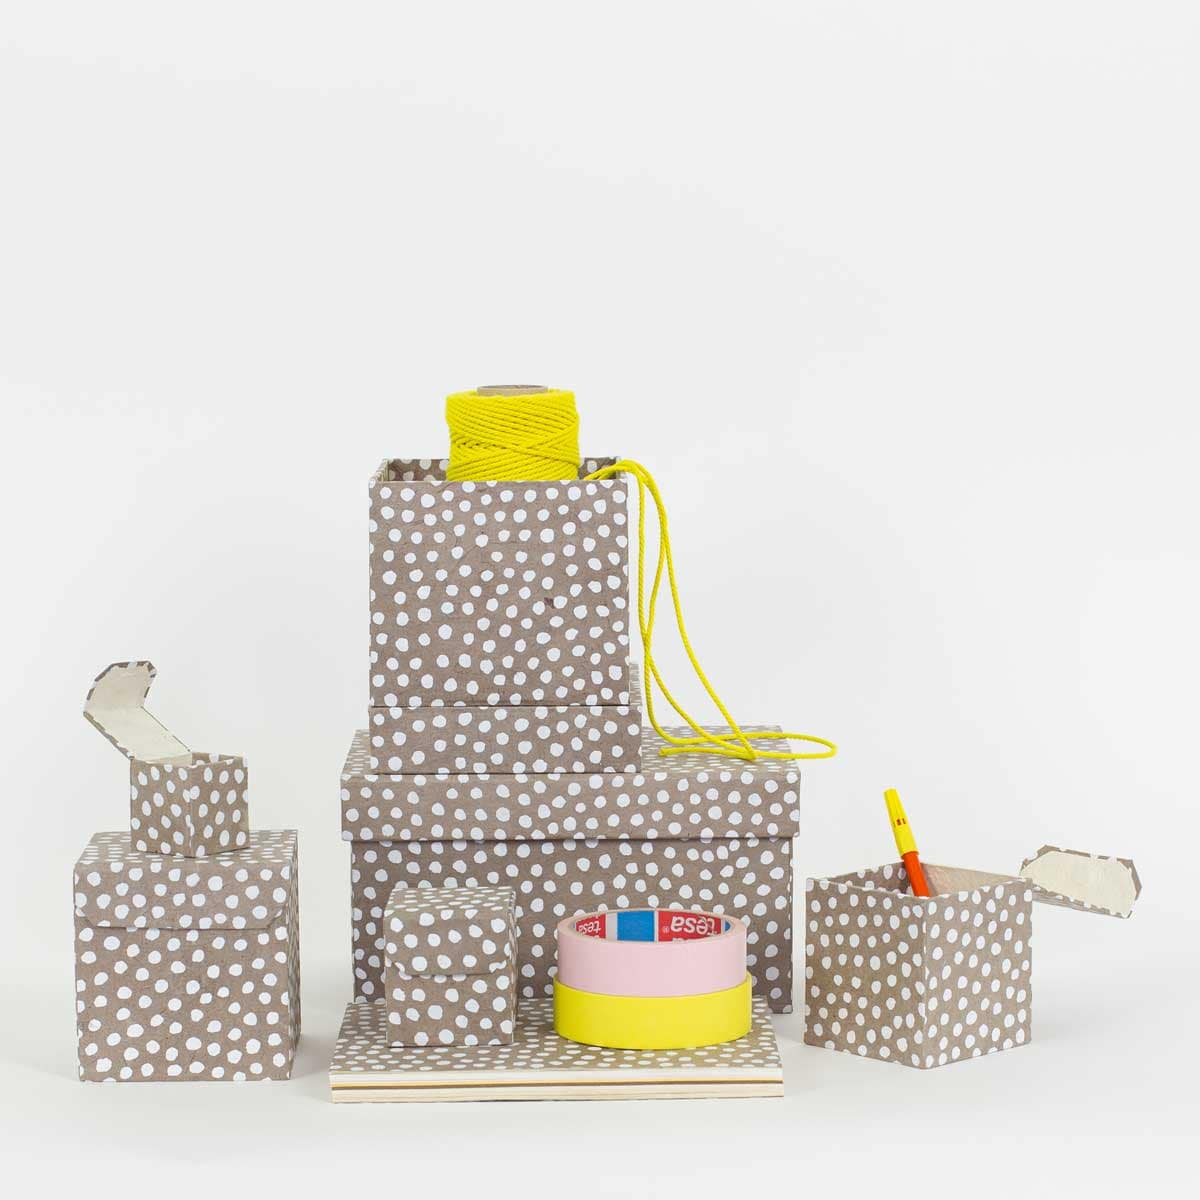 DOTTED Boxes 4-set, beige/white